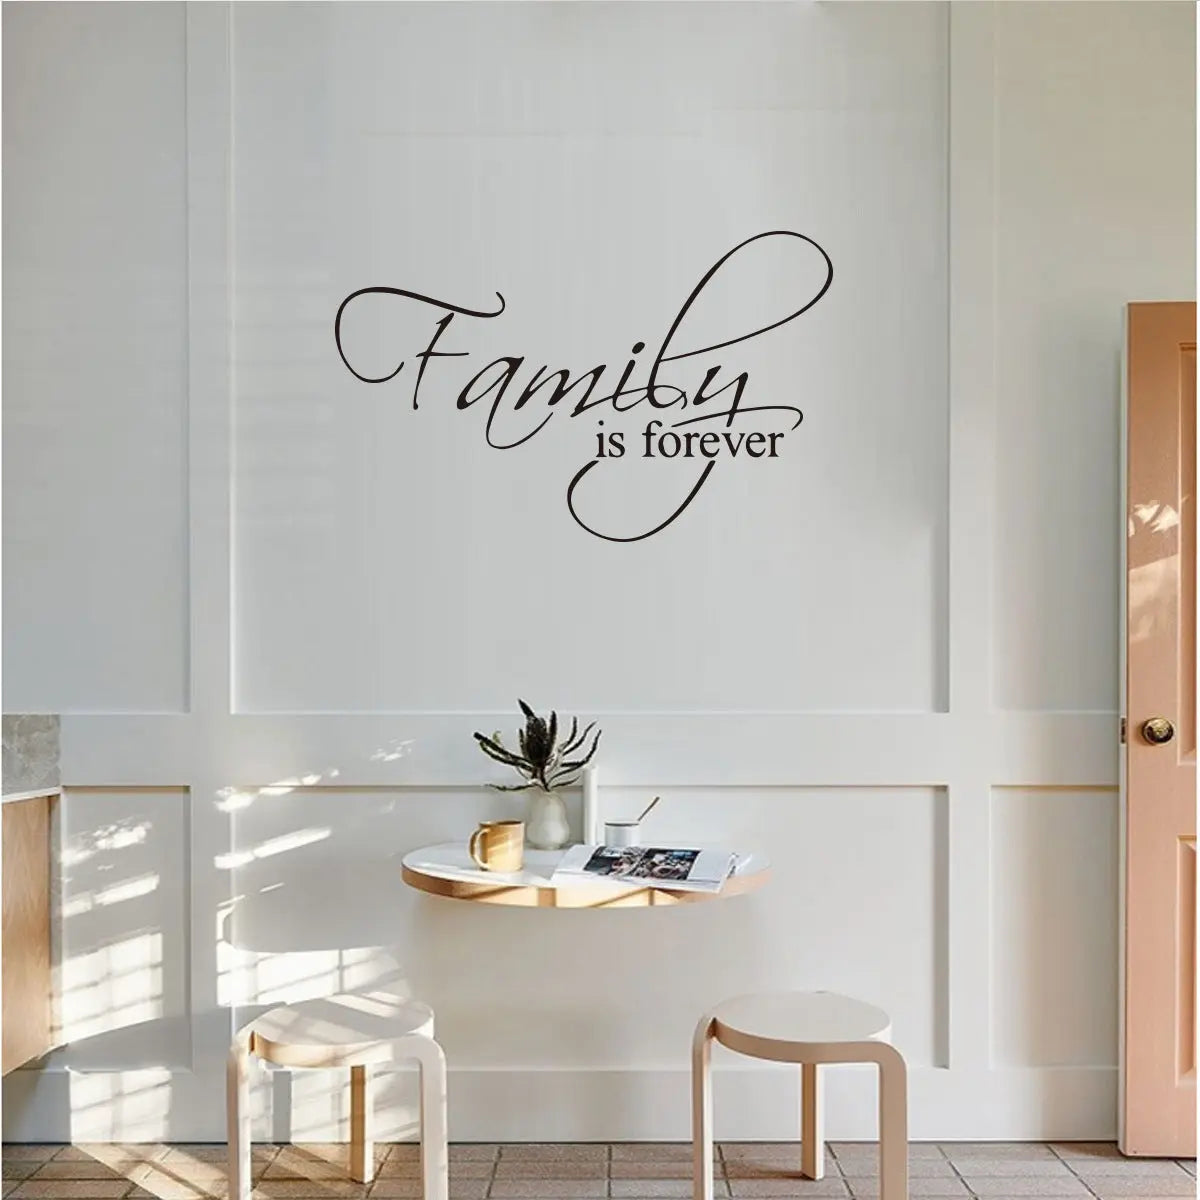 Family is Forever Wall Stickers 